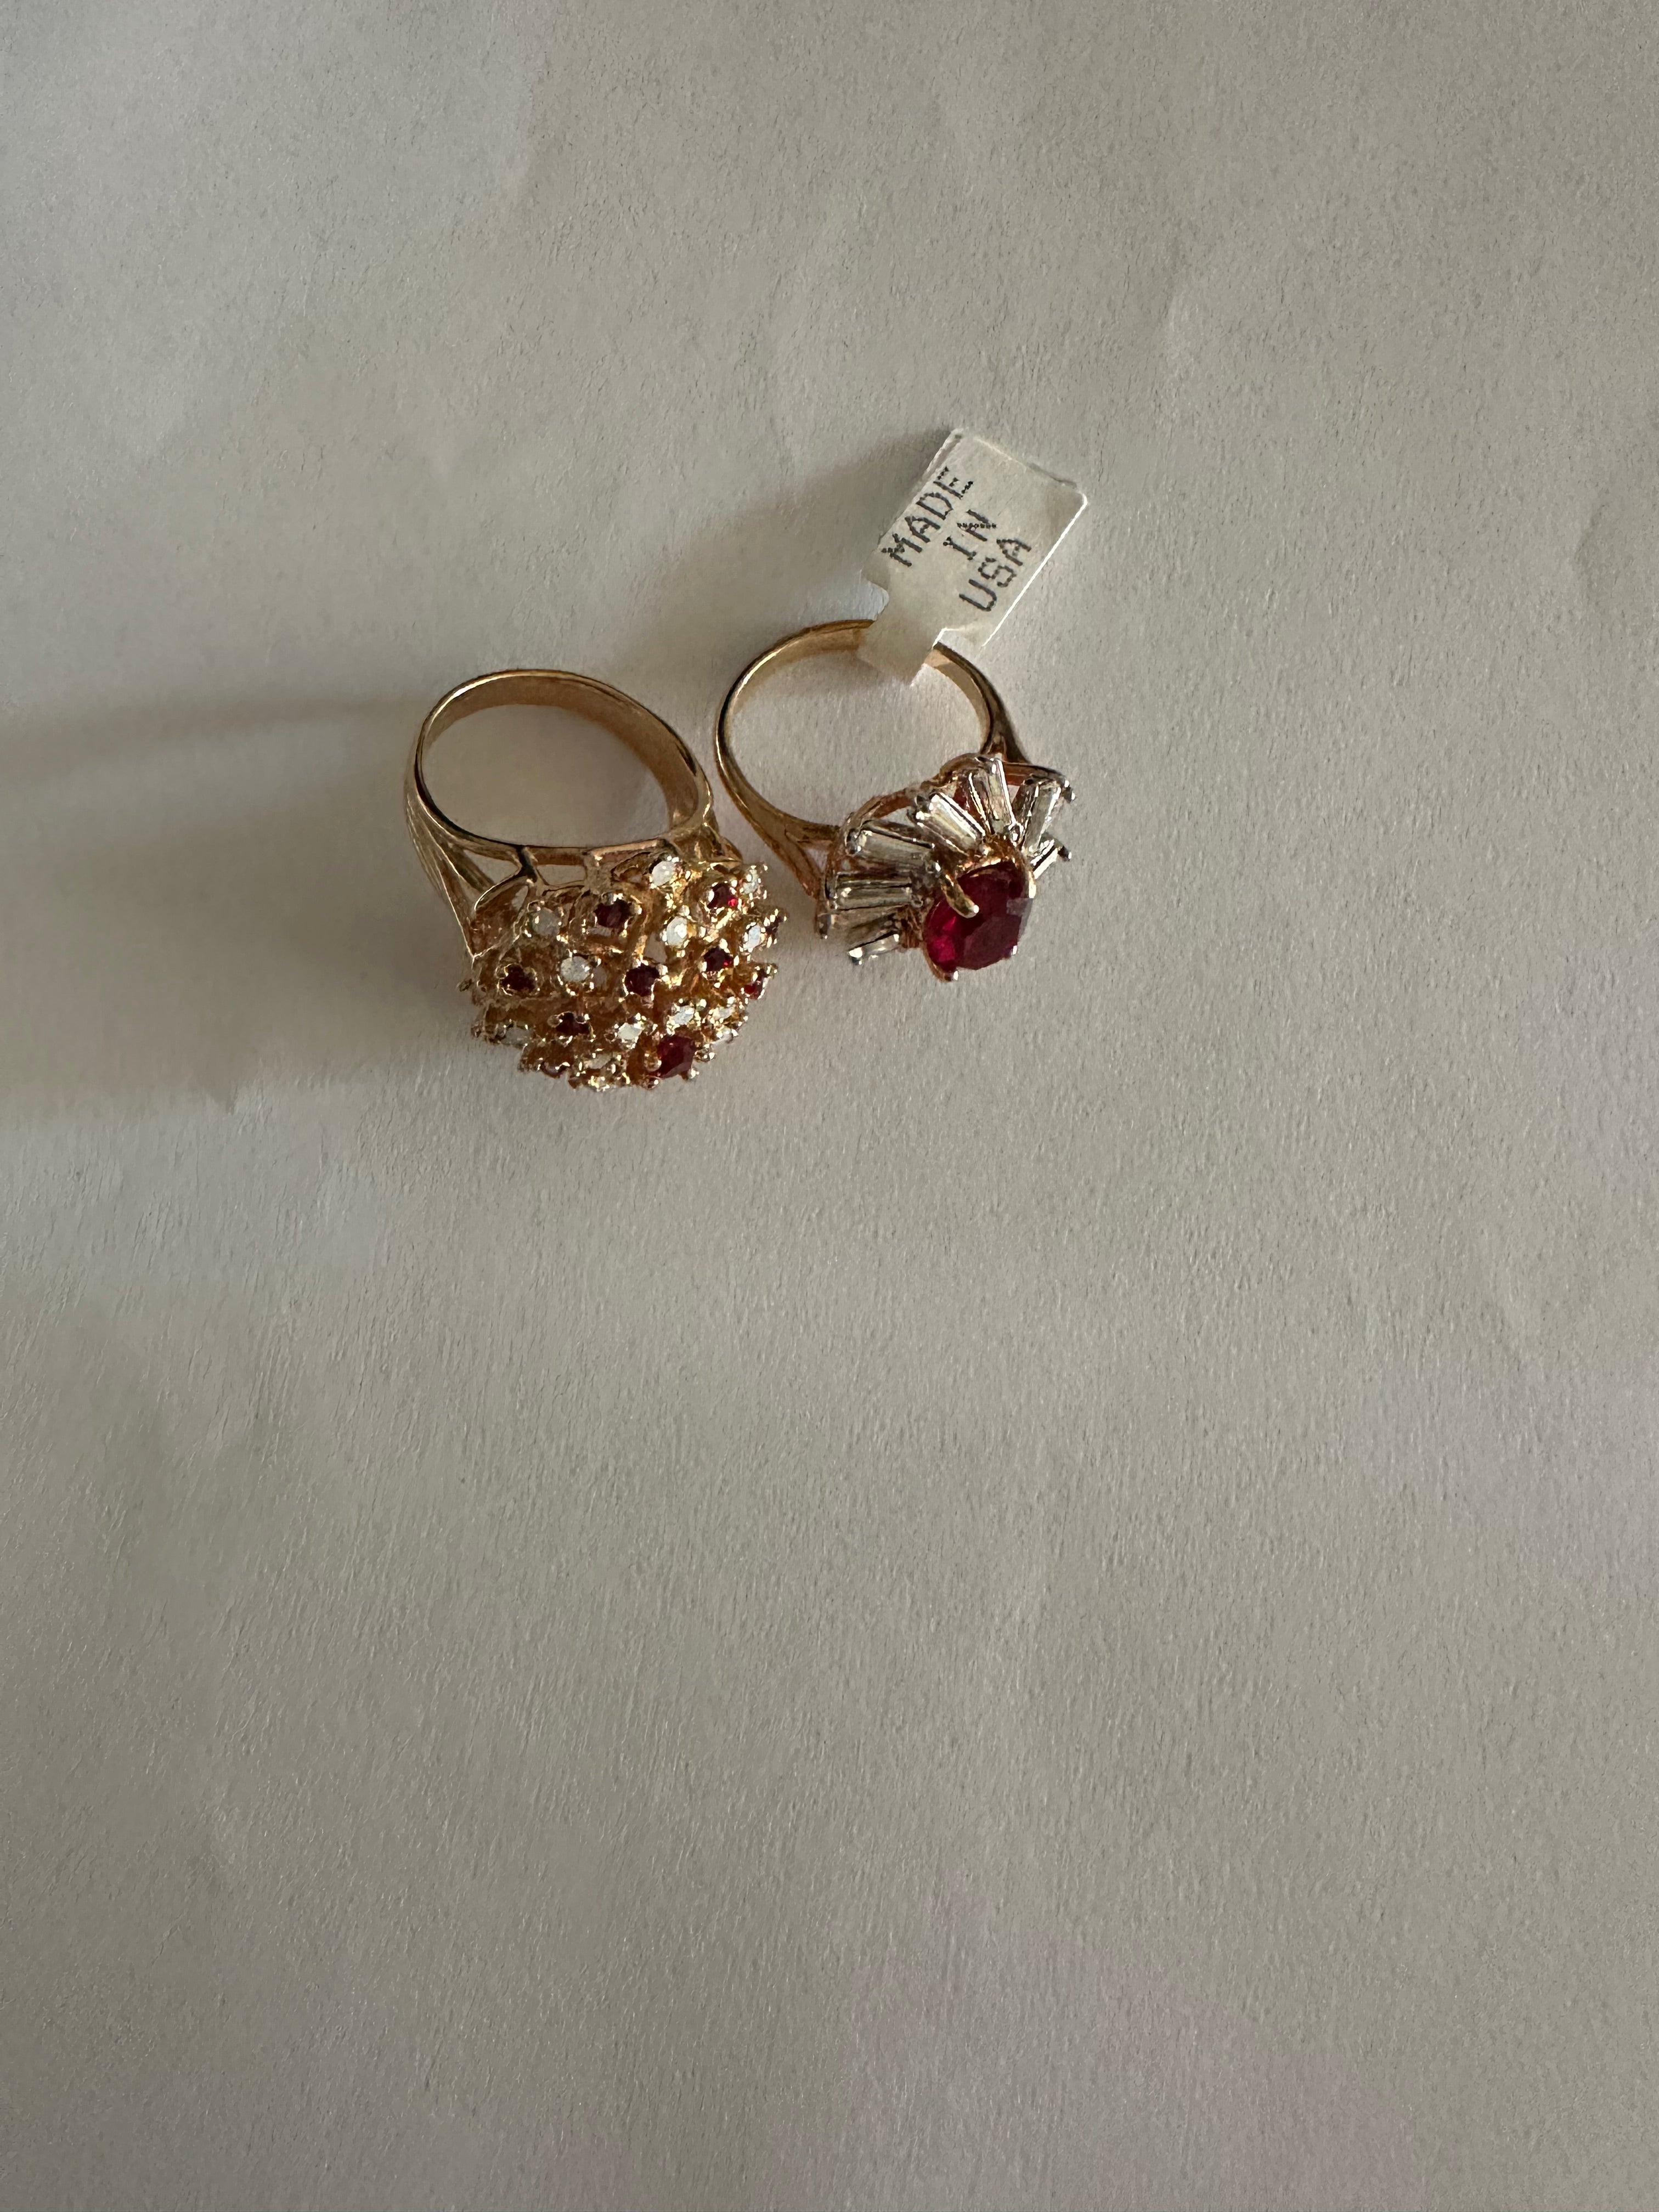 Vintage New Stock Rings Huge Jewelry Ruby and Clear Crystal Cocktail 2 Rings in 18kt Gold Electroplate Made in the USA